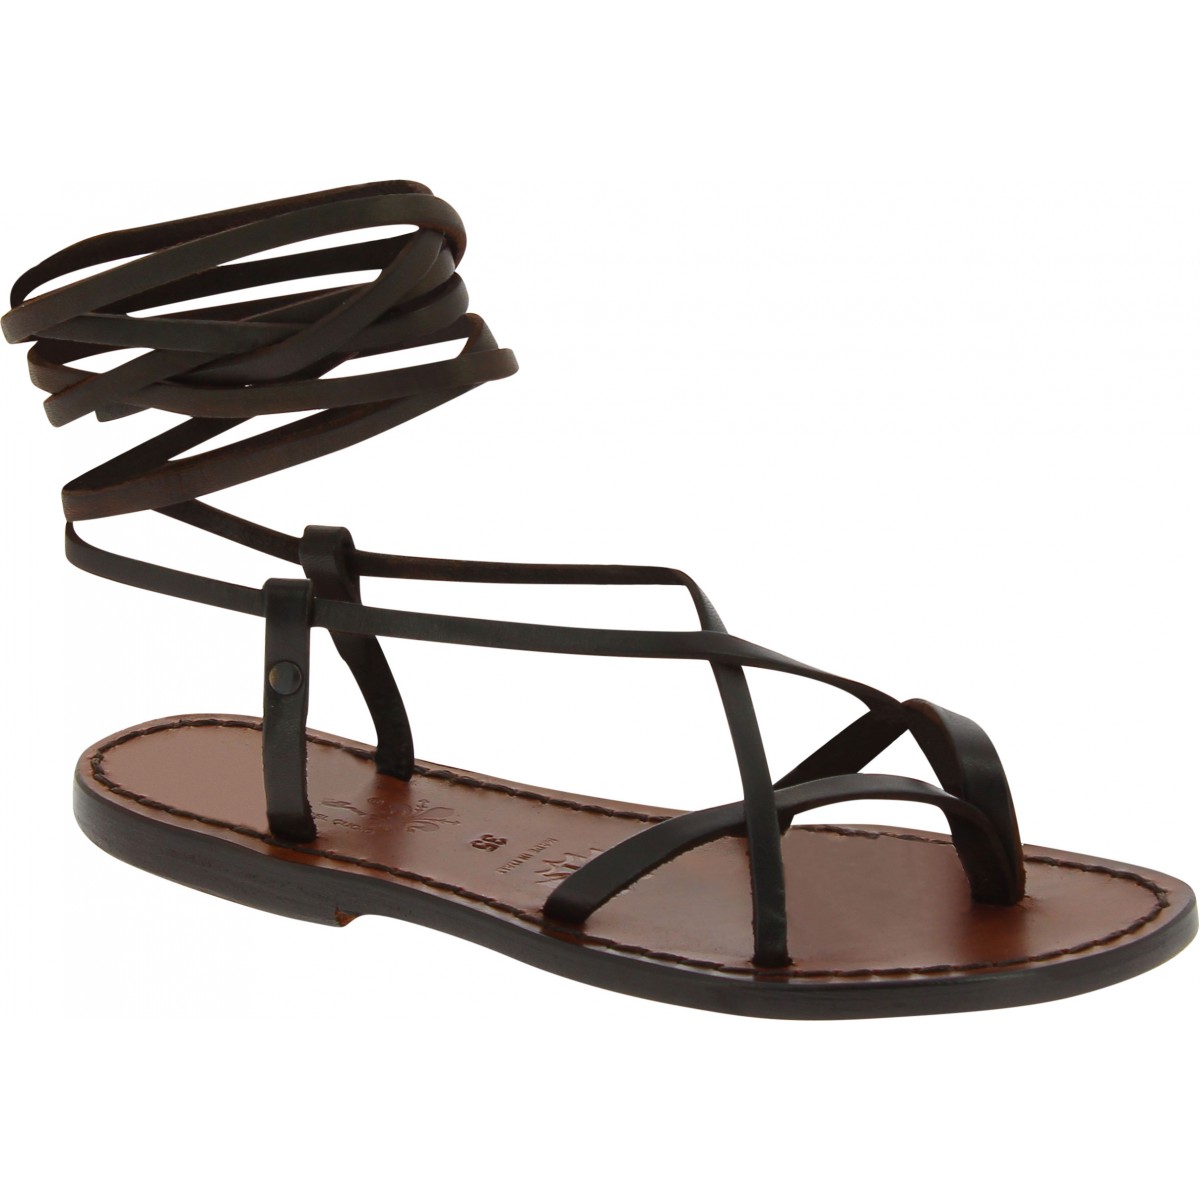 Dark brown leather flat strappy sandals handmade in Italy | The leather ...